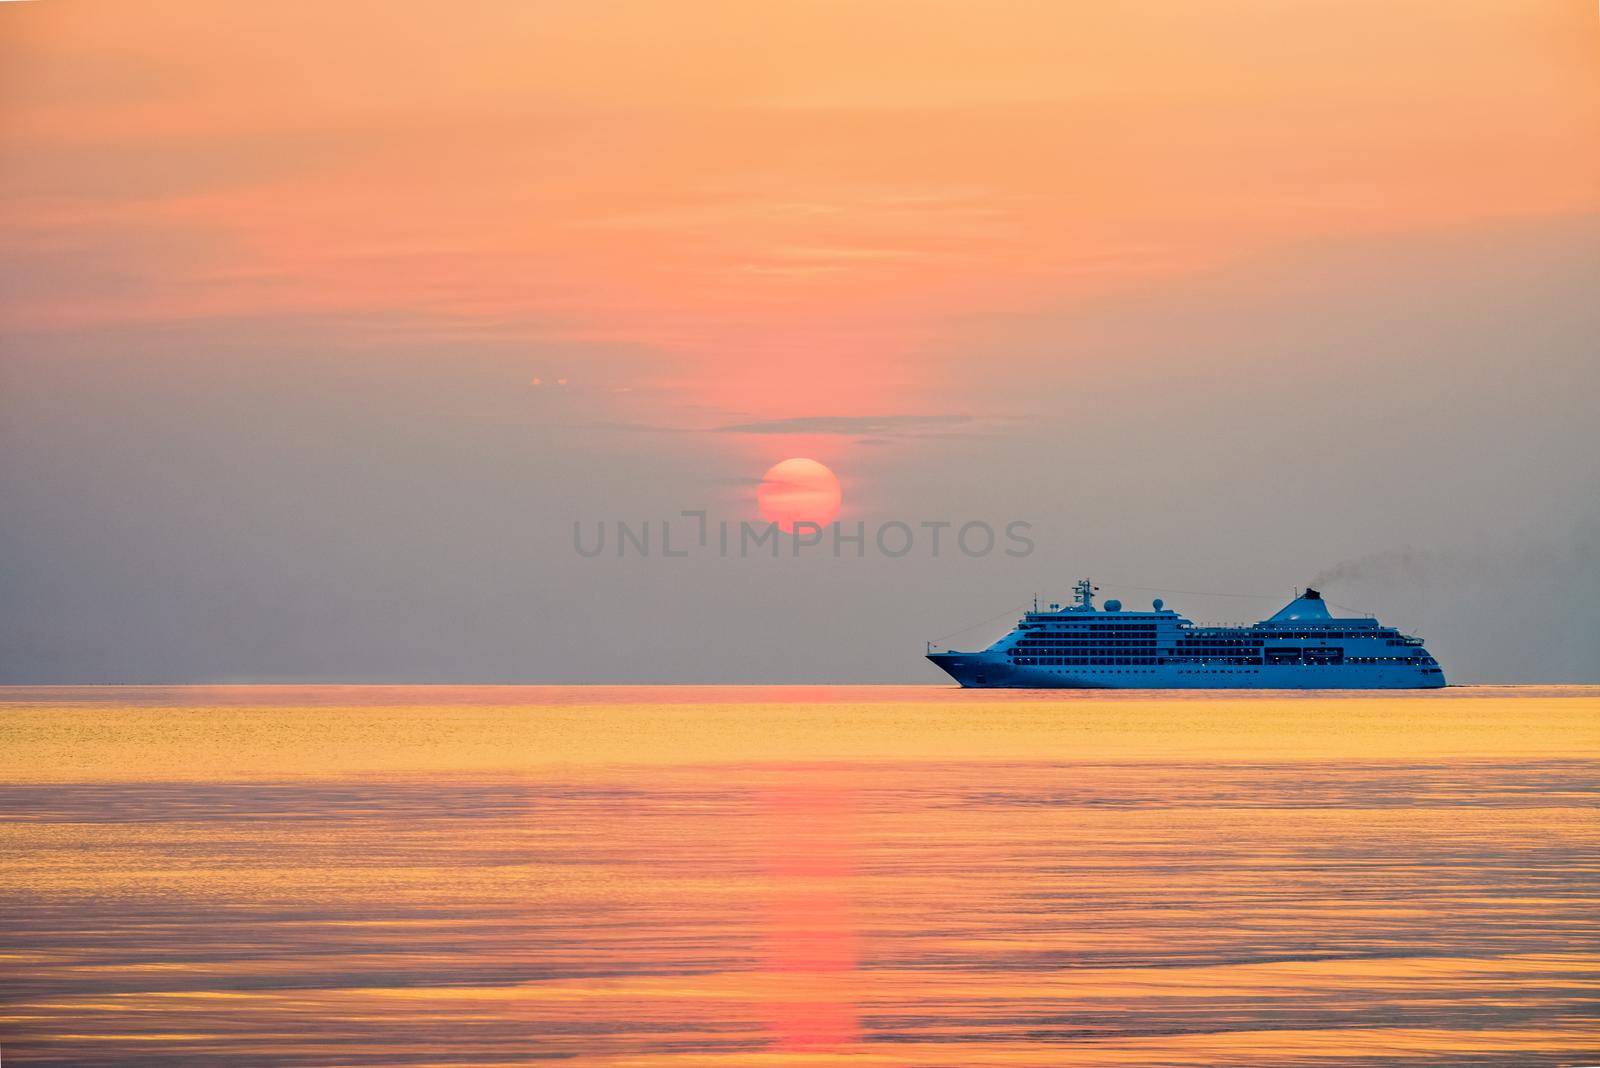 Travel by Cruise ship in the ocean, large luxury passenger boat is sailing on the bright sea, red sun in the colorful sky is yellow, orange, beautiful nature landscape at sunset or sunrise background